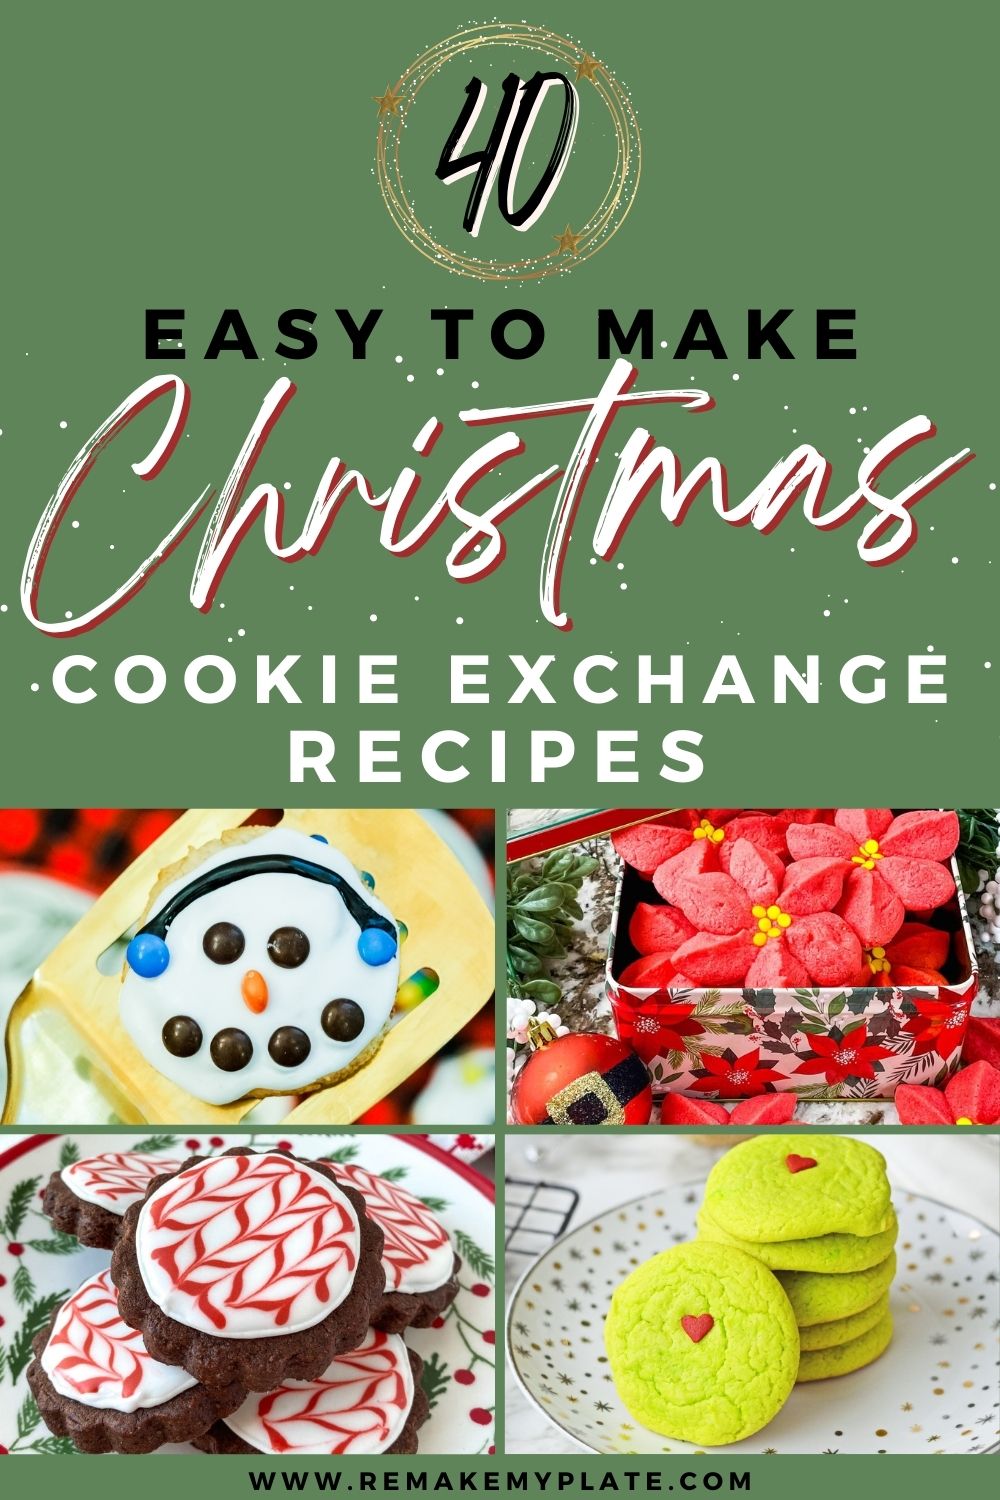 40 Easy to make Christmas Cookie Exchange Recipes